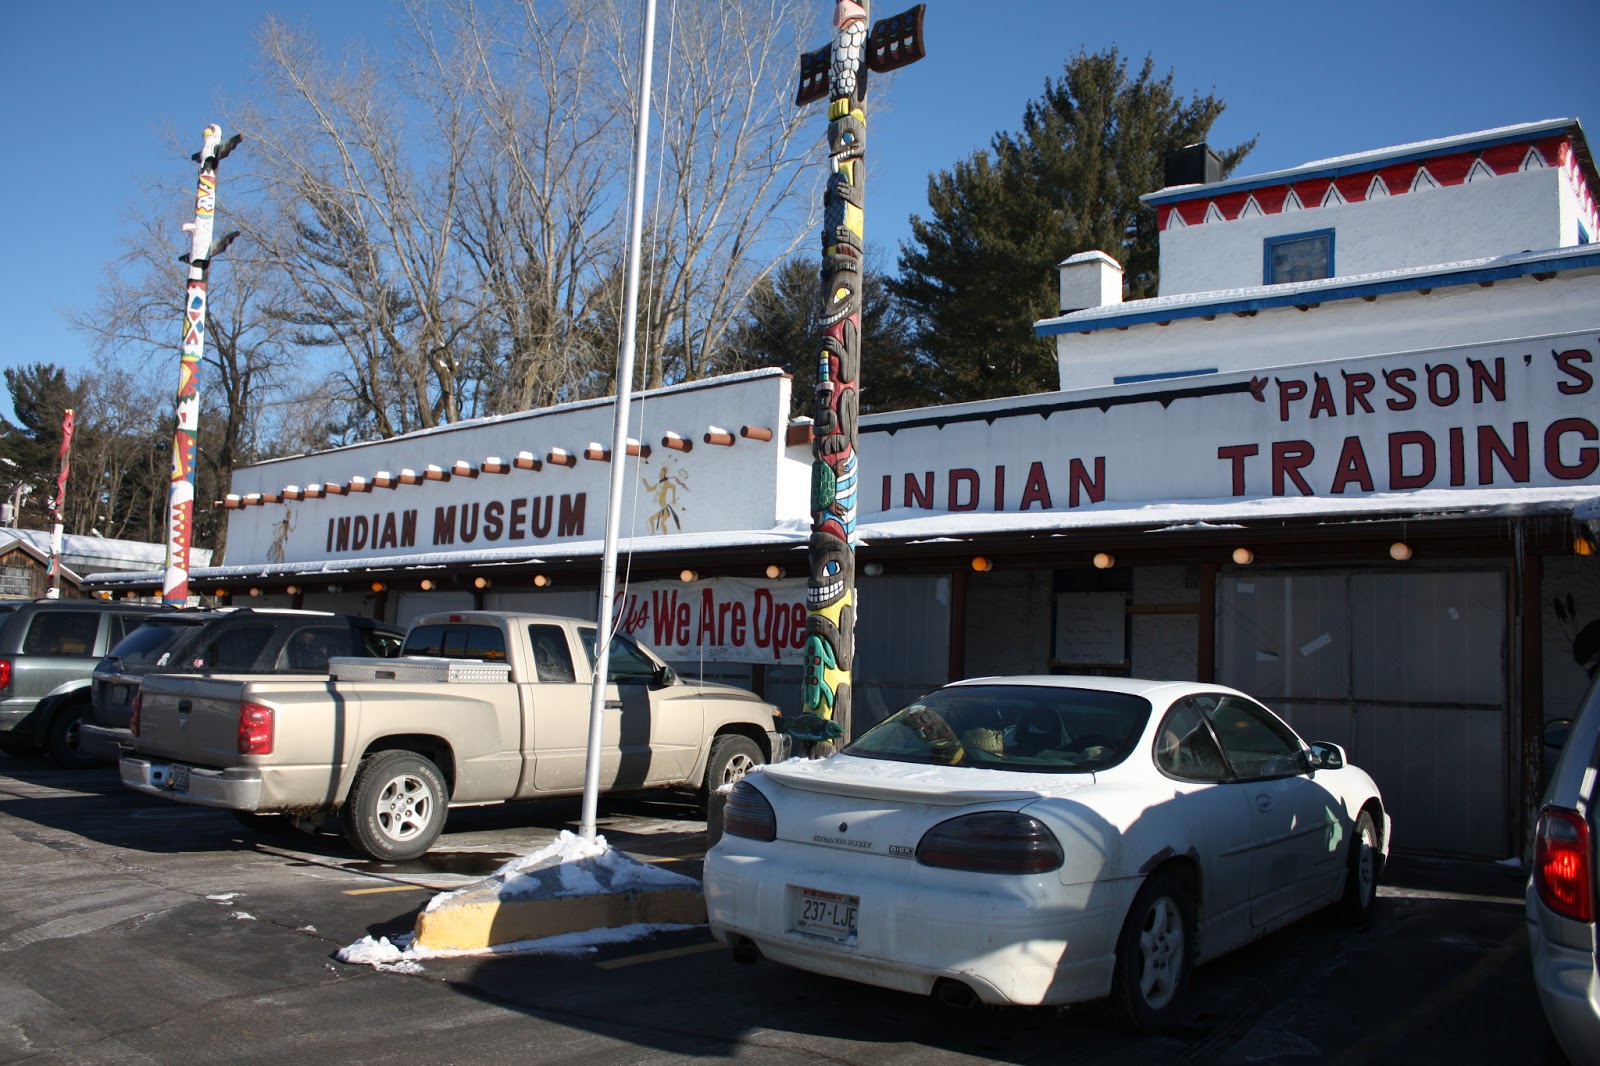 A Little Time and a Keyboard: Parson's Indian Trading Post 